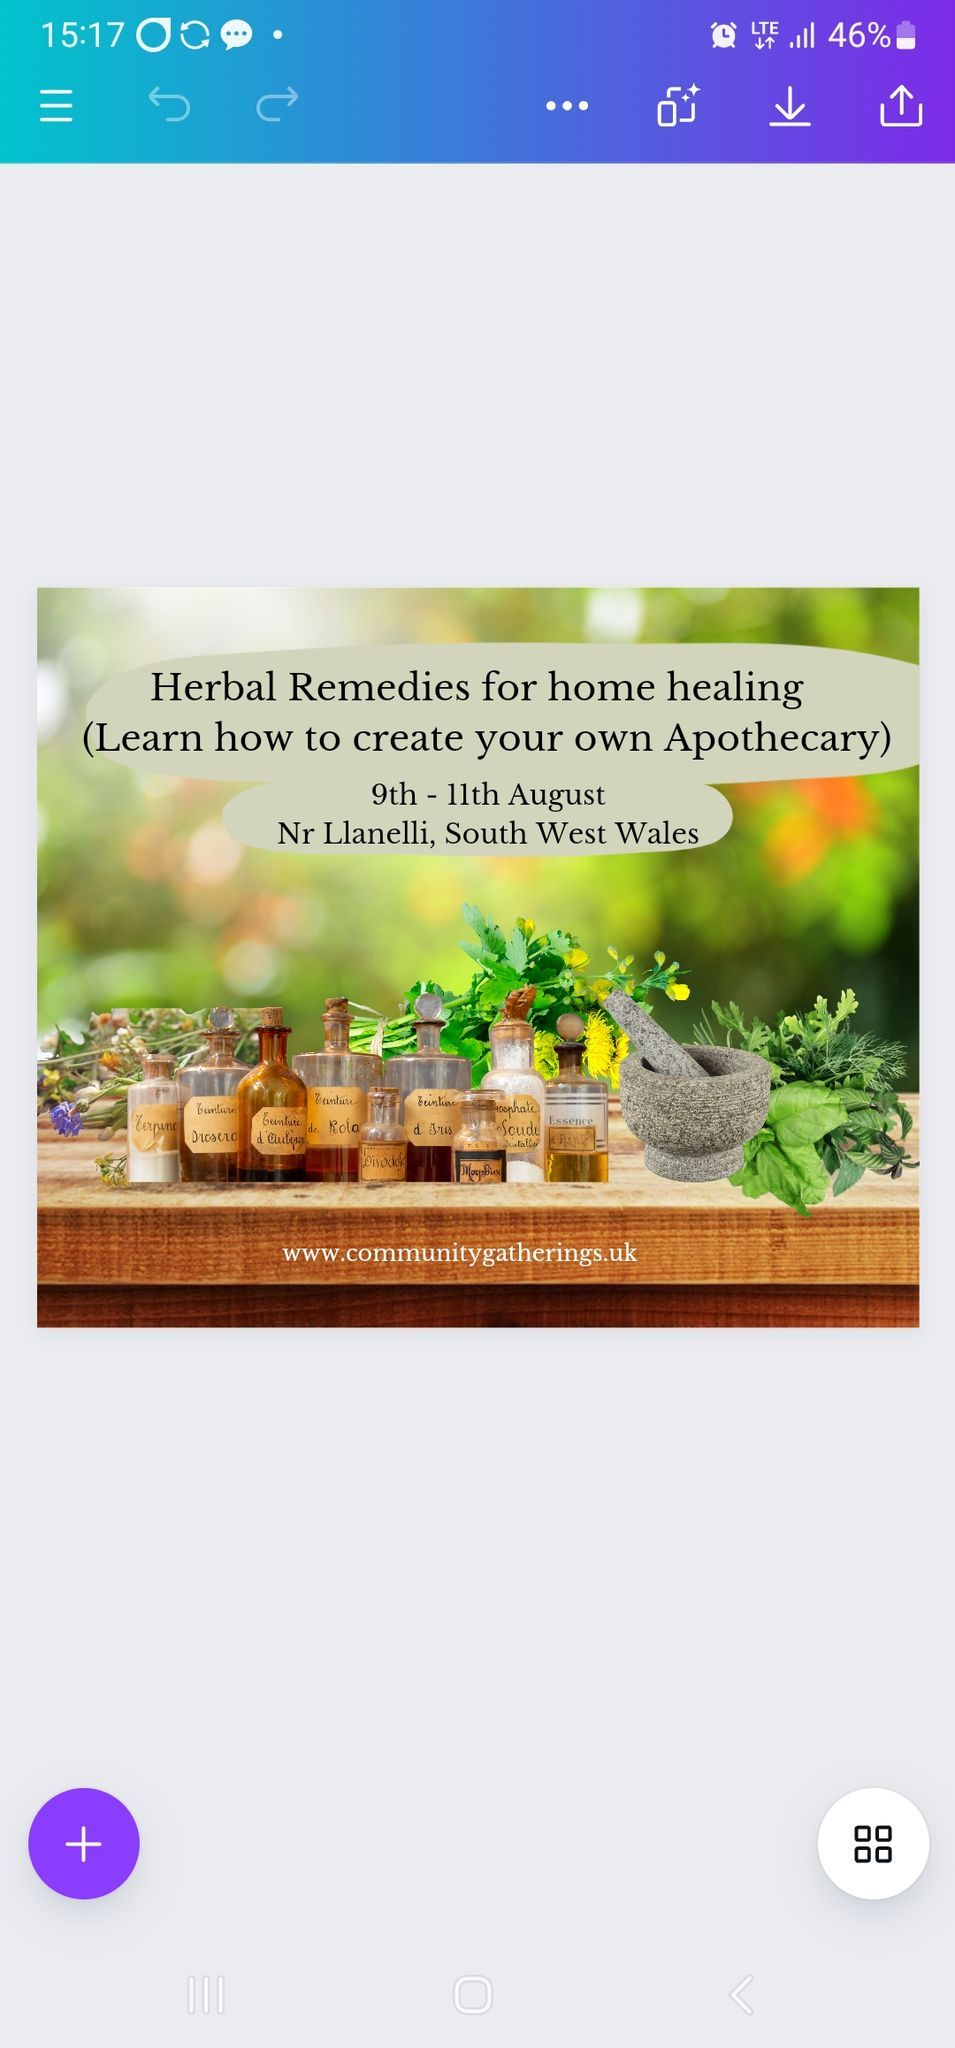 Herbal Remedies for home healing (Learn how to create your own Apothecary)